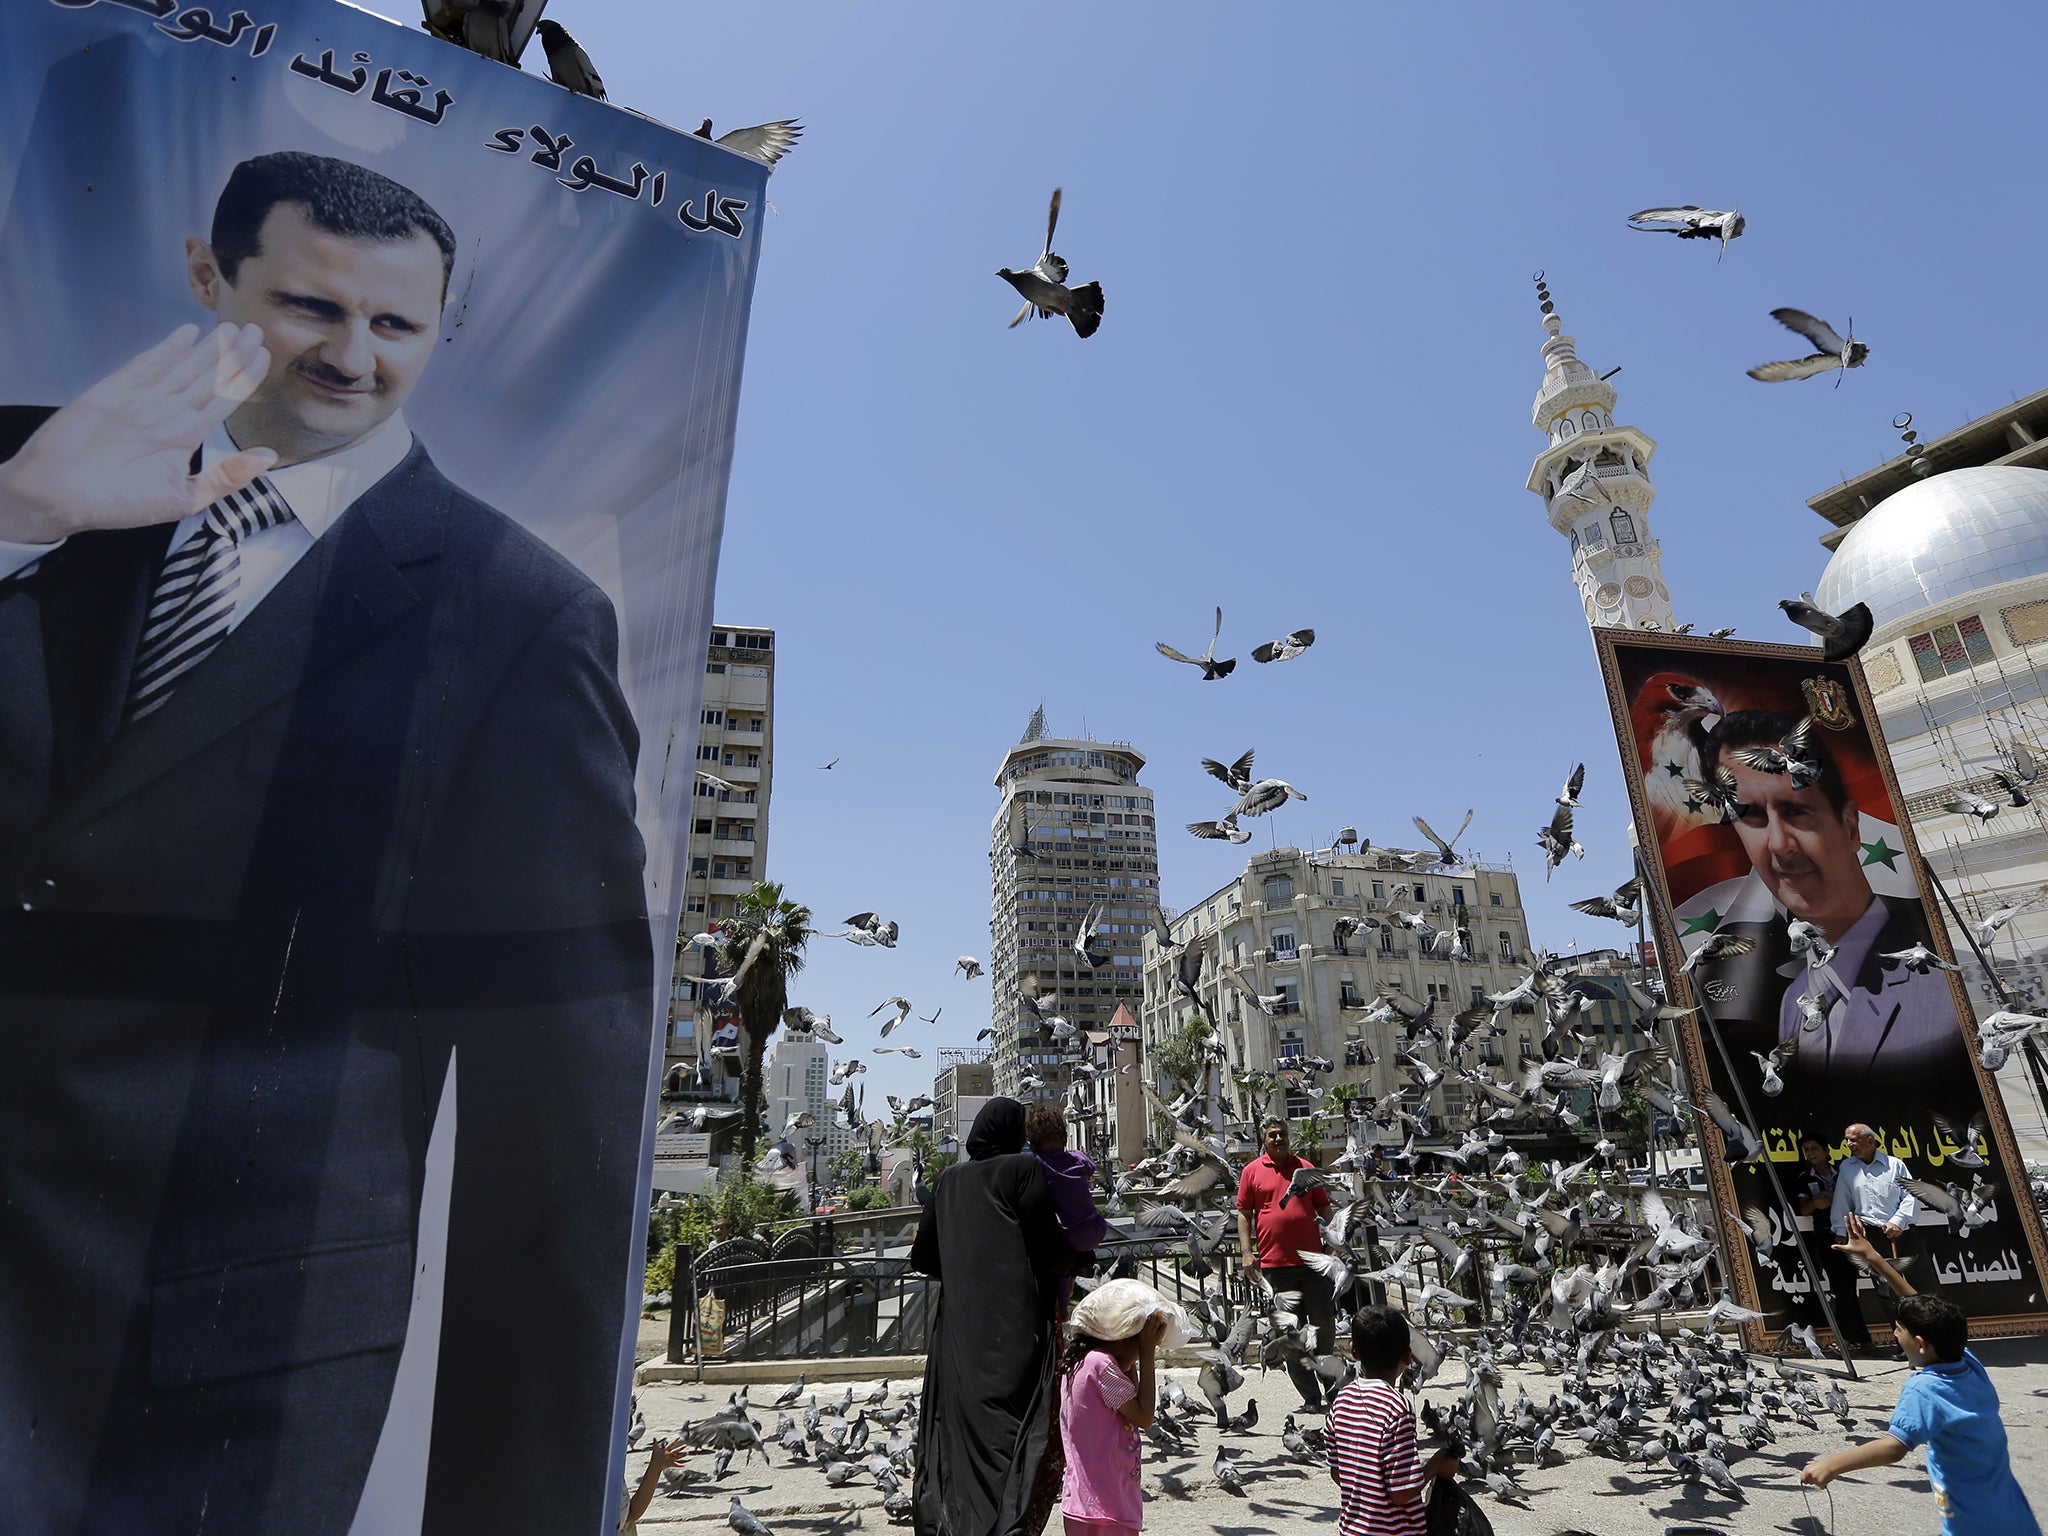 Jean-Clément Jeanbart says it is a 'big lie' the forces opposed to Assad are moderate and in support of freedom